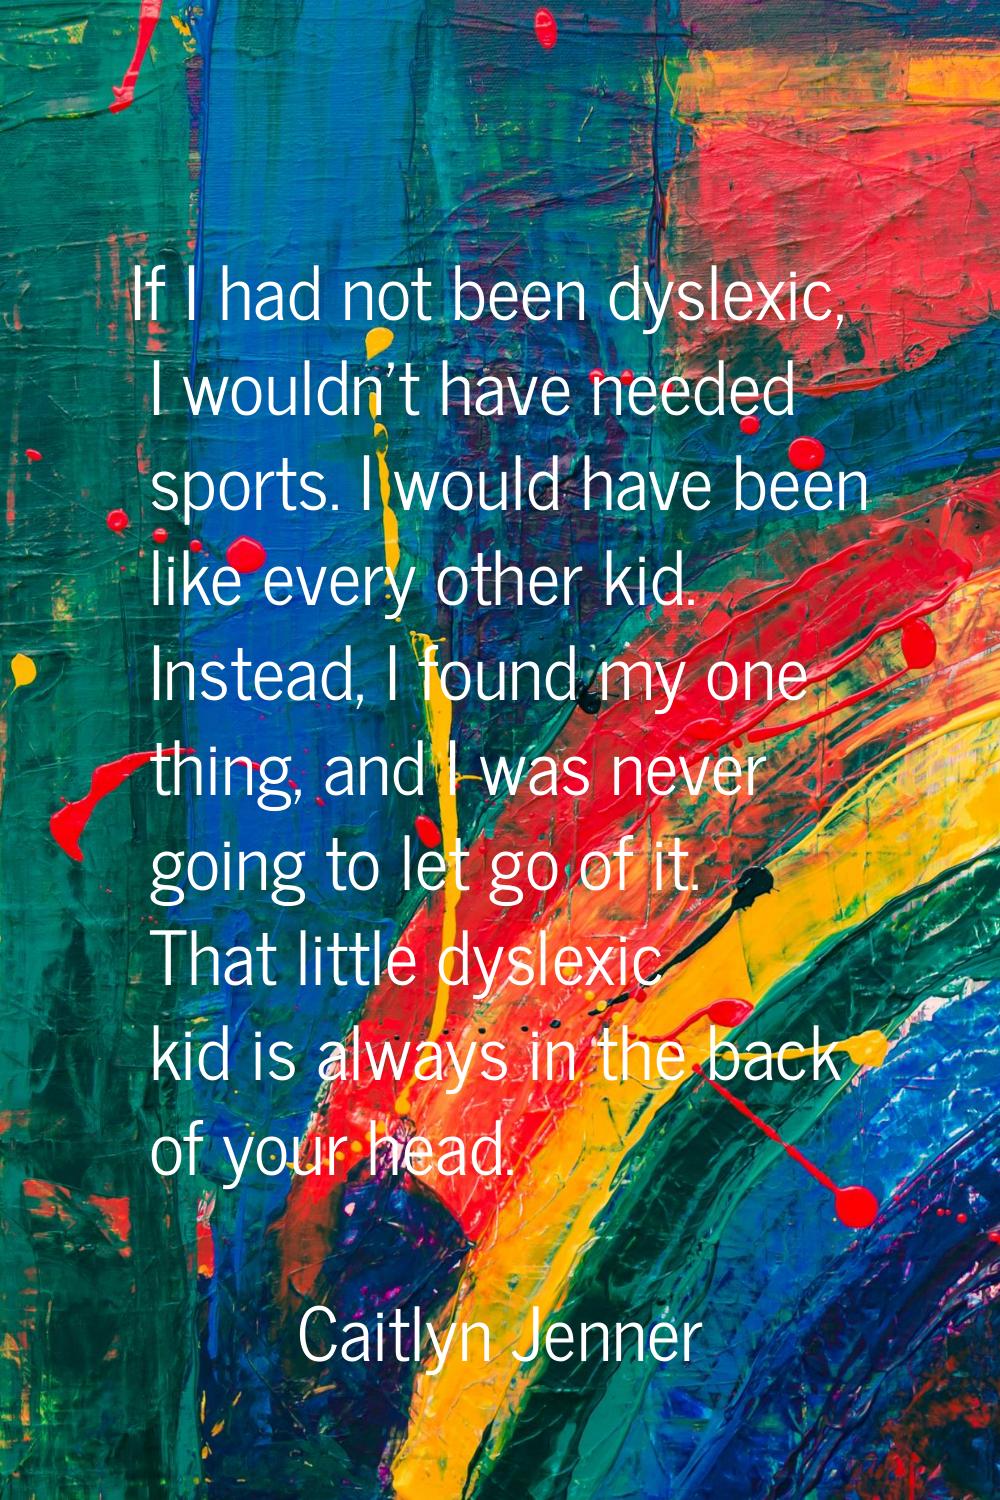 If I had not been dyslexic, I wouldn't have needed sports. I would have been like every other kid. 